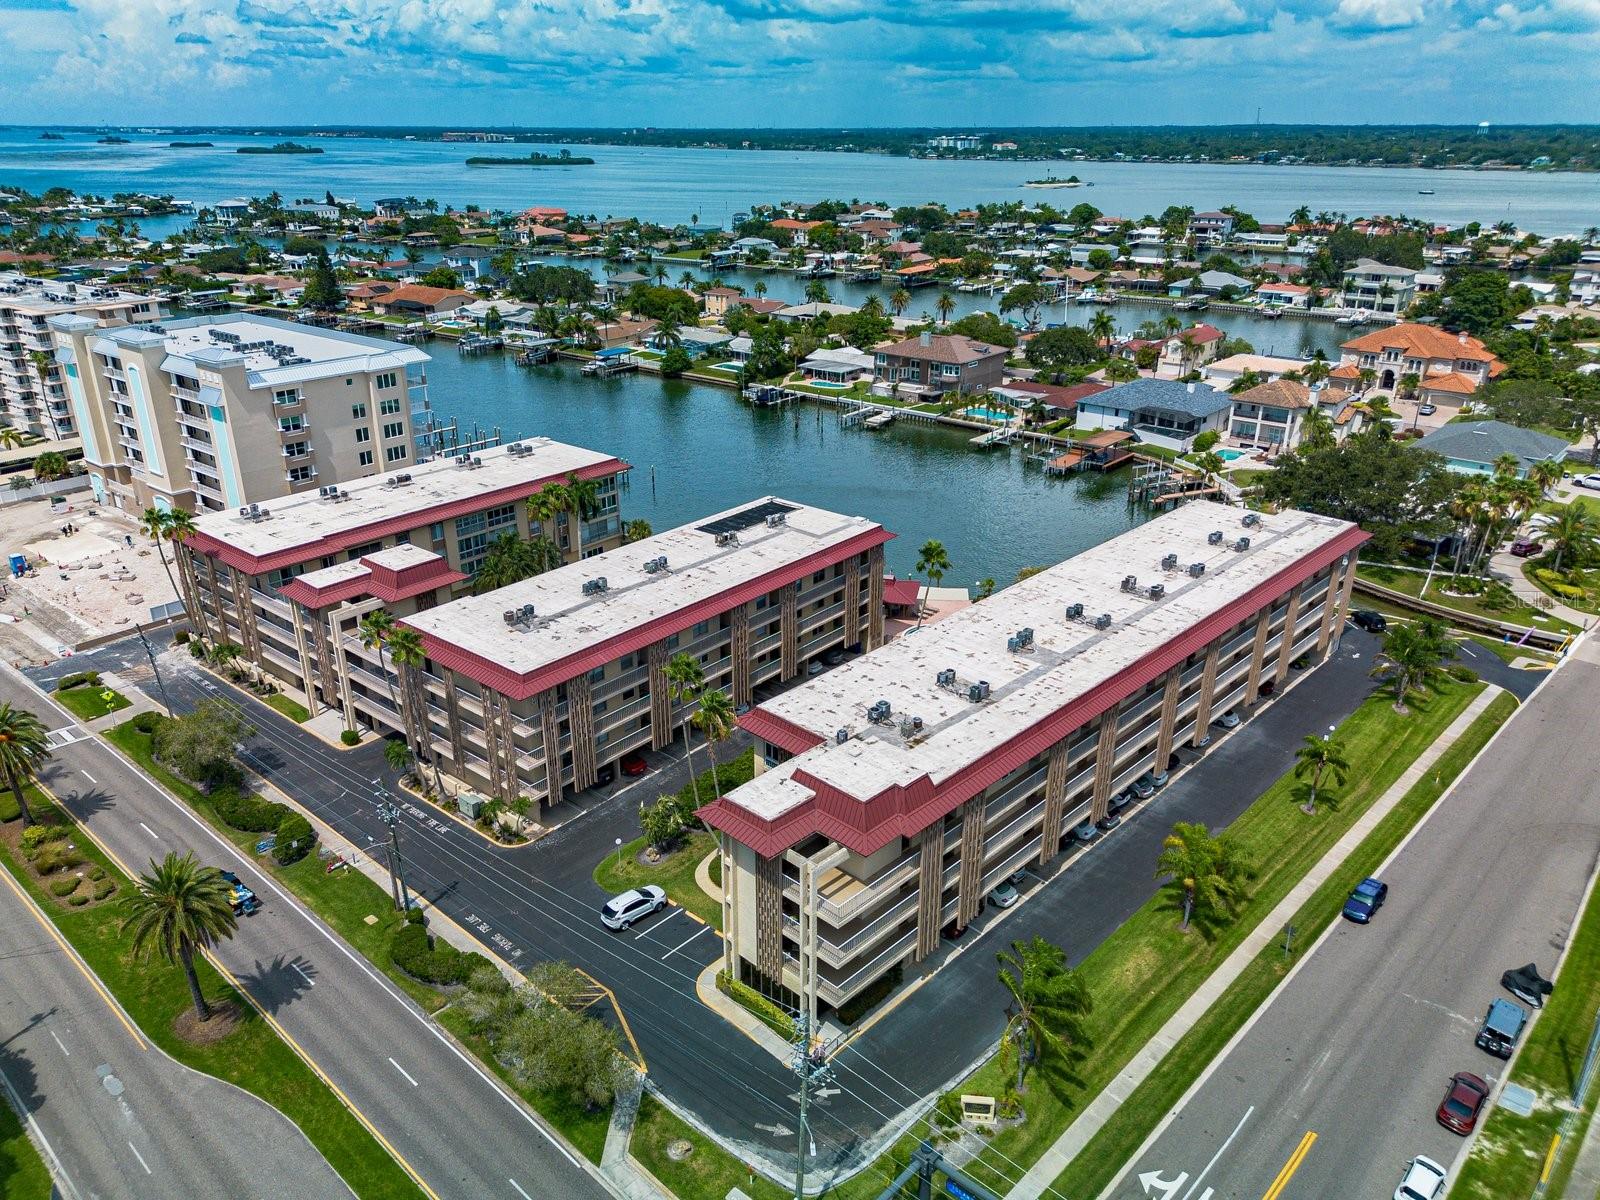 For sale: 105 ISLAND WAY # 138, CLEARWATER FL 33767, CLEARWATER, FL